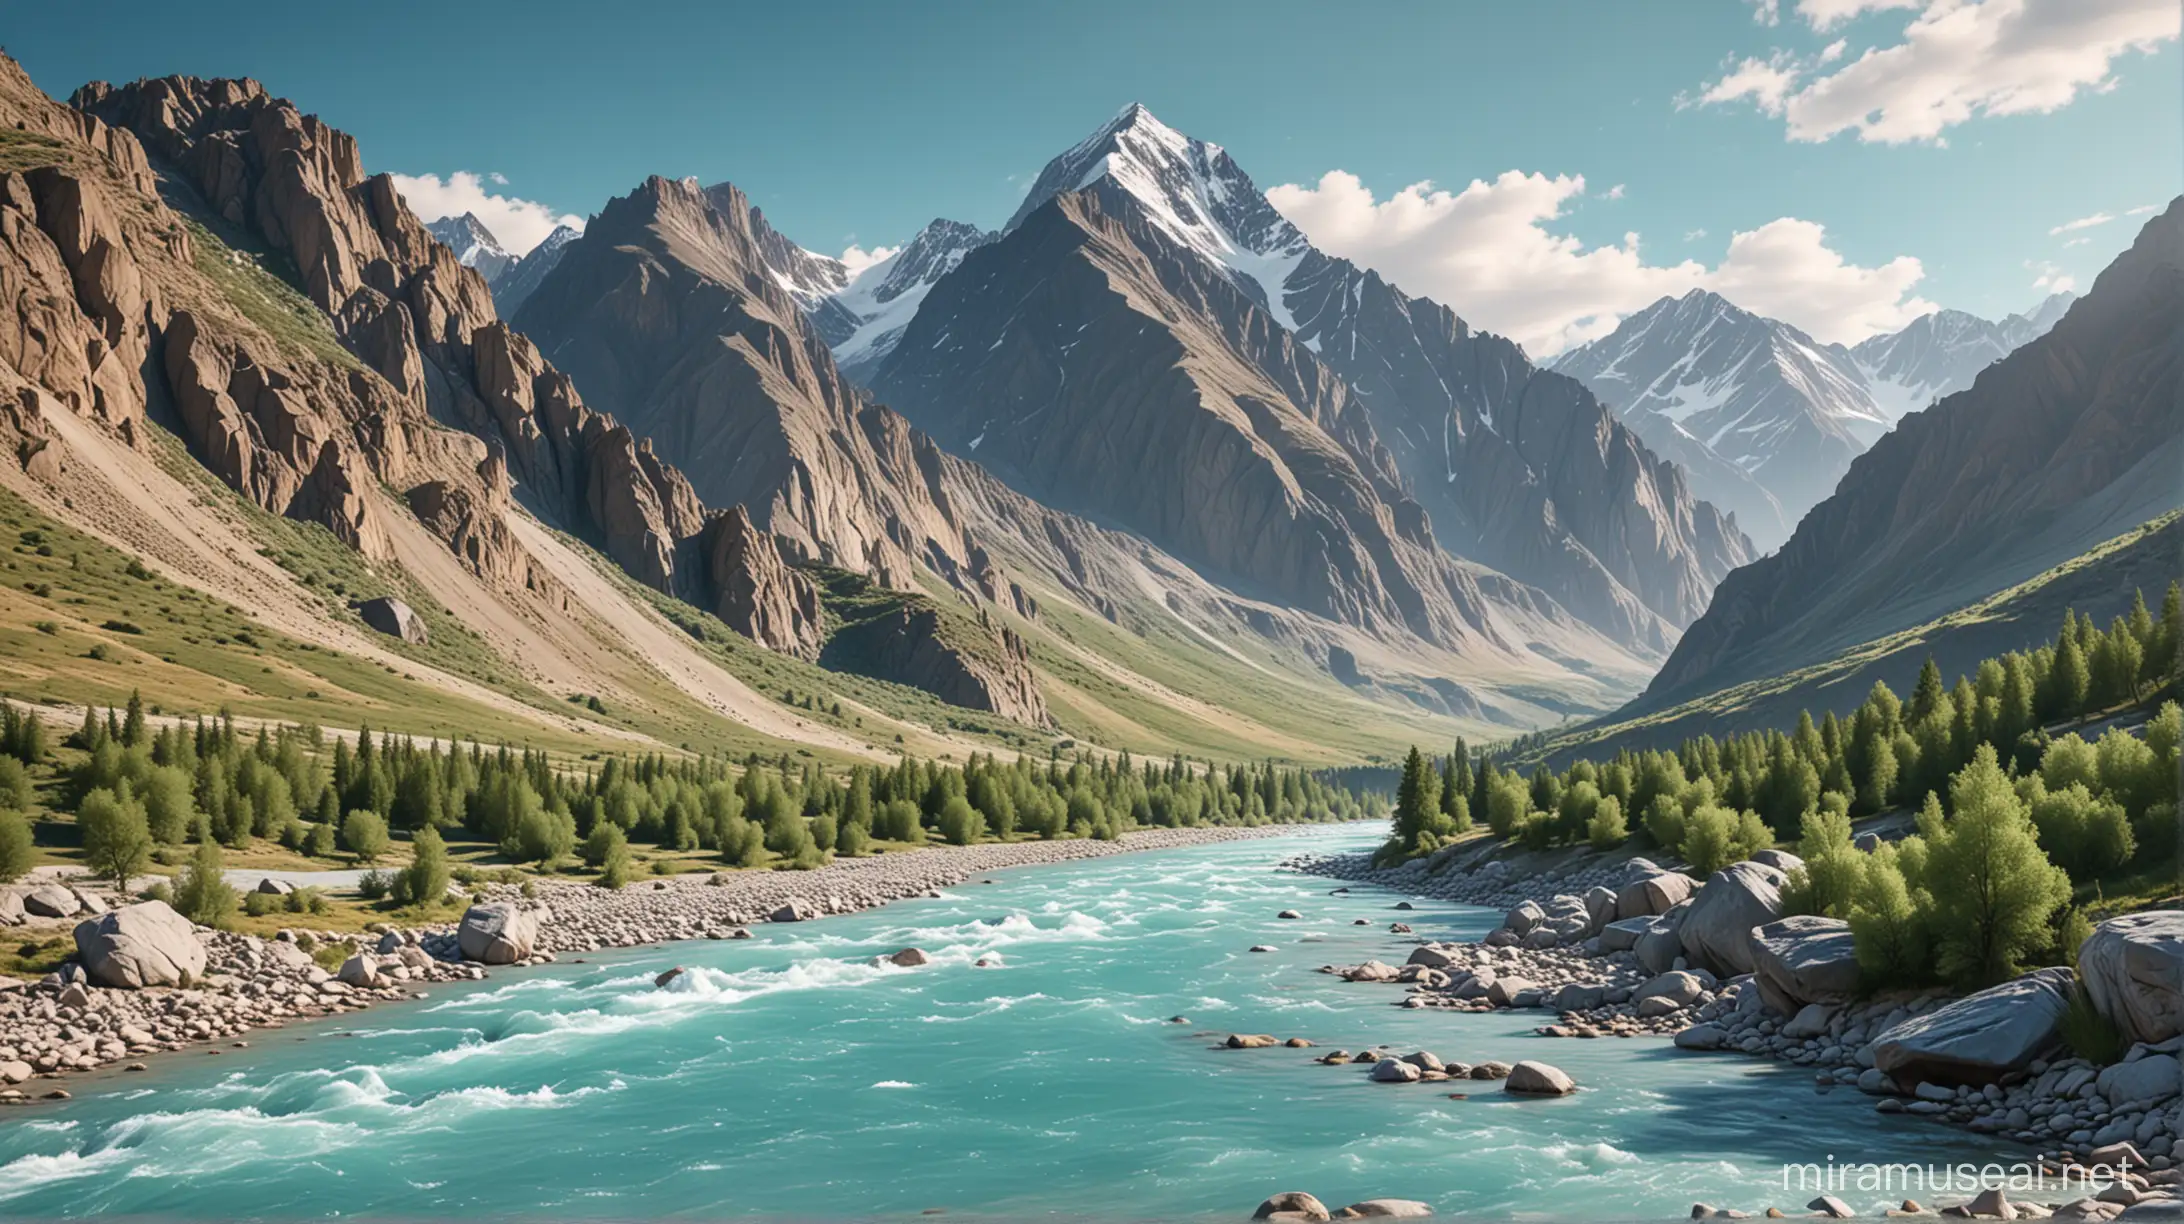 Altai, Bulukha mountain close-up, summer, Katun river, turquoise river, hyperalism, photorealism, ultra-high quality, detailed, 8K, vector illustration, clip-art